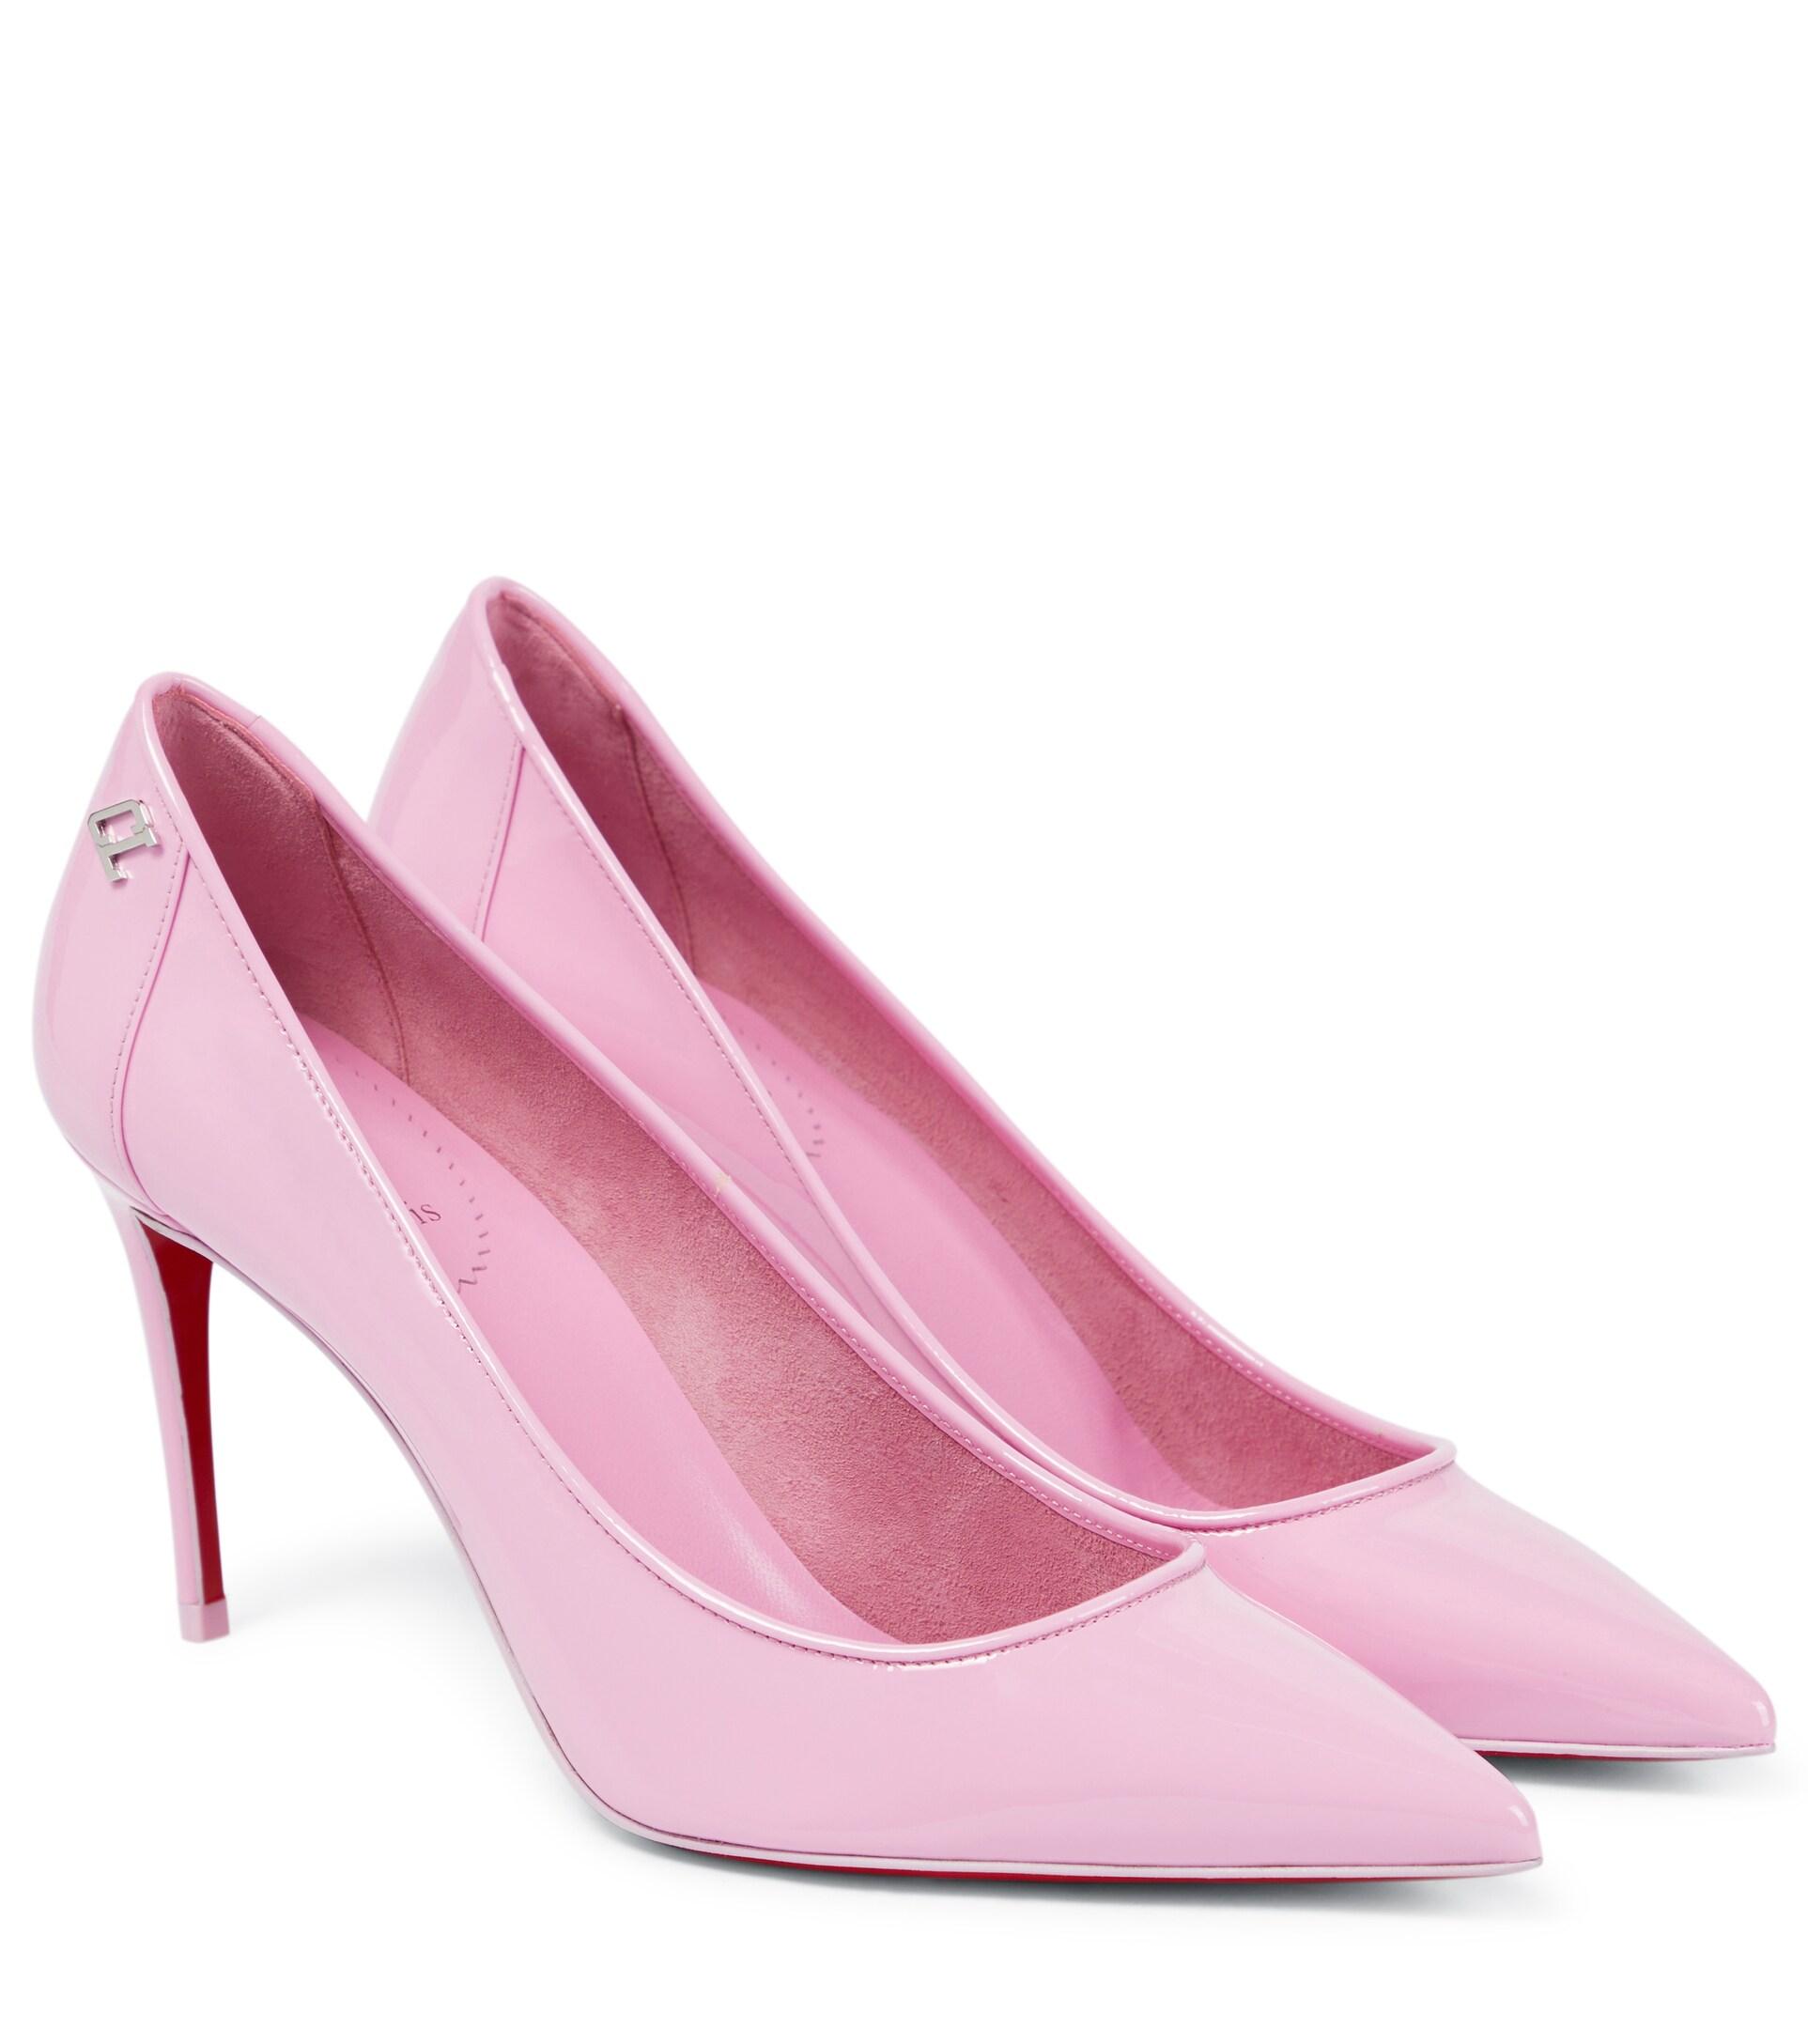 Christian Louboutin Sporty Kate 85 Patent Leather Pumps in Pink | Lyst